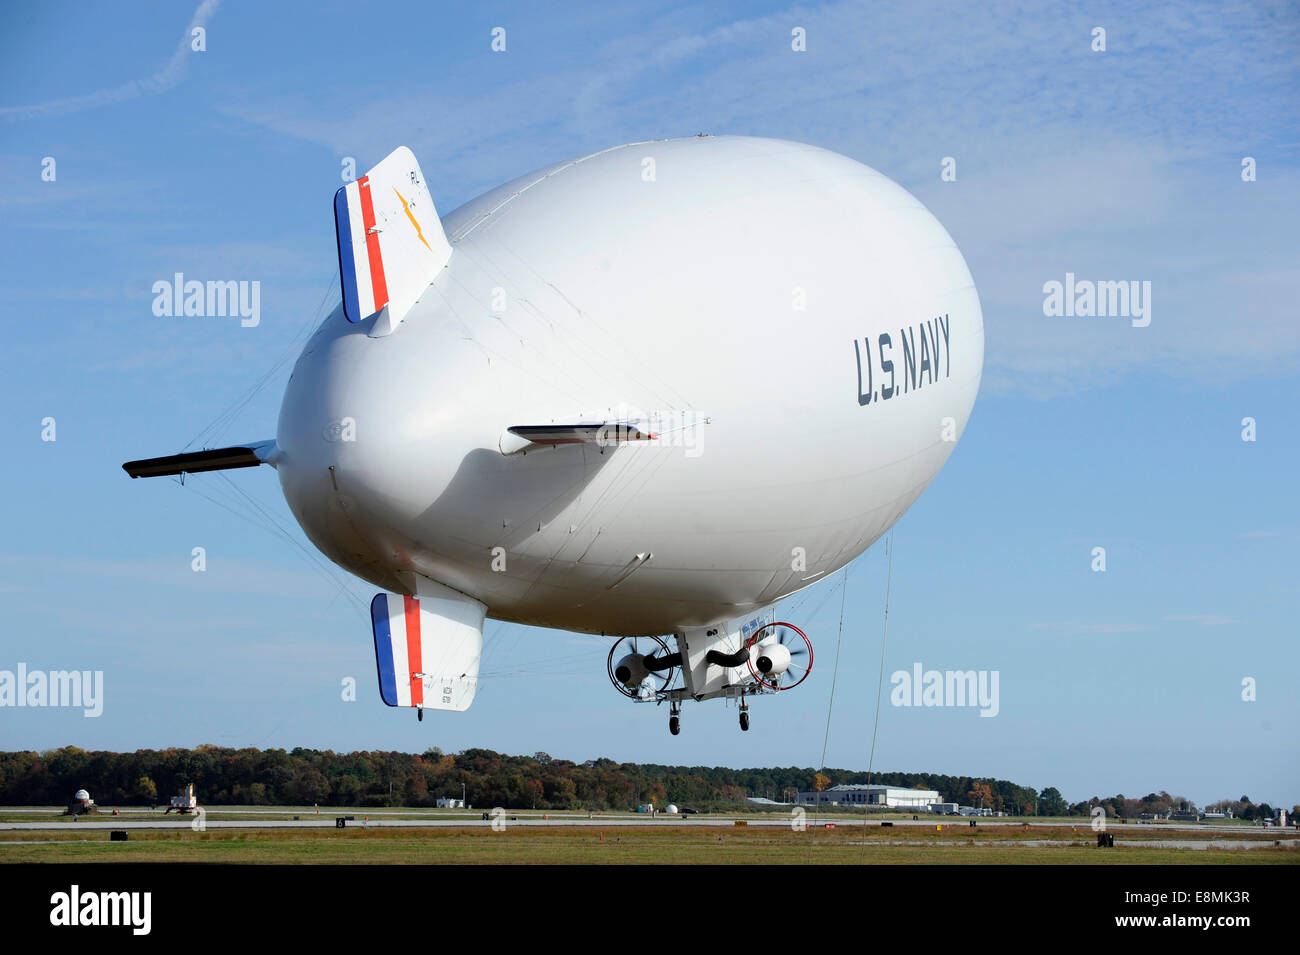 November 6, 2013 - The Navy's MZ-3A manned airship lifts off for an orientation flight from Patuxent River, Maryland. The MZ-3A Stock Photo